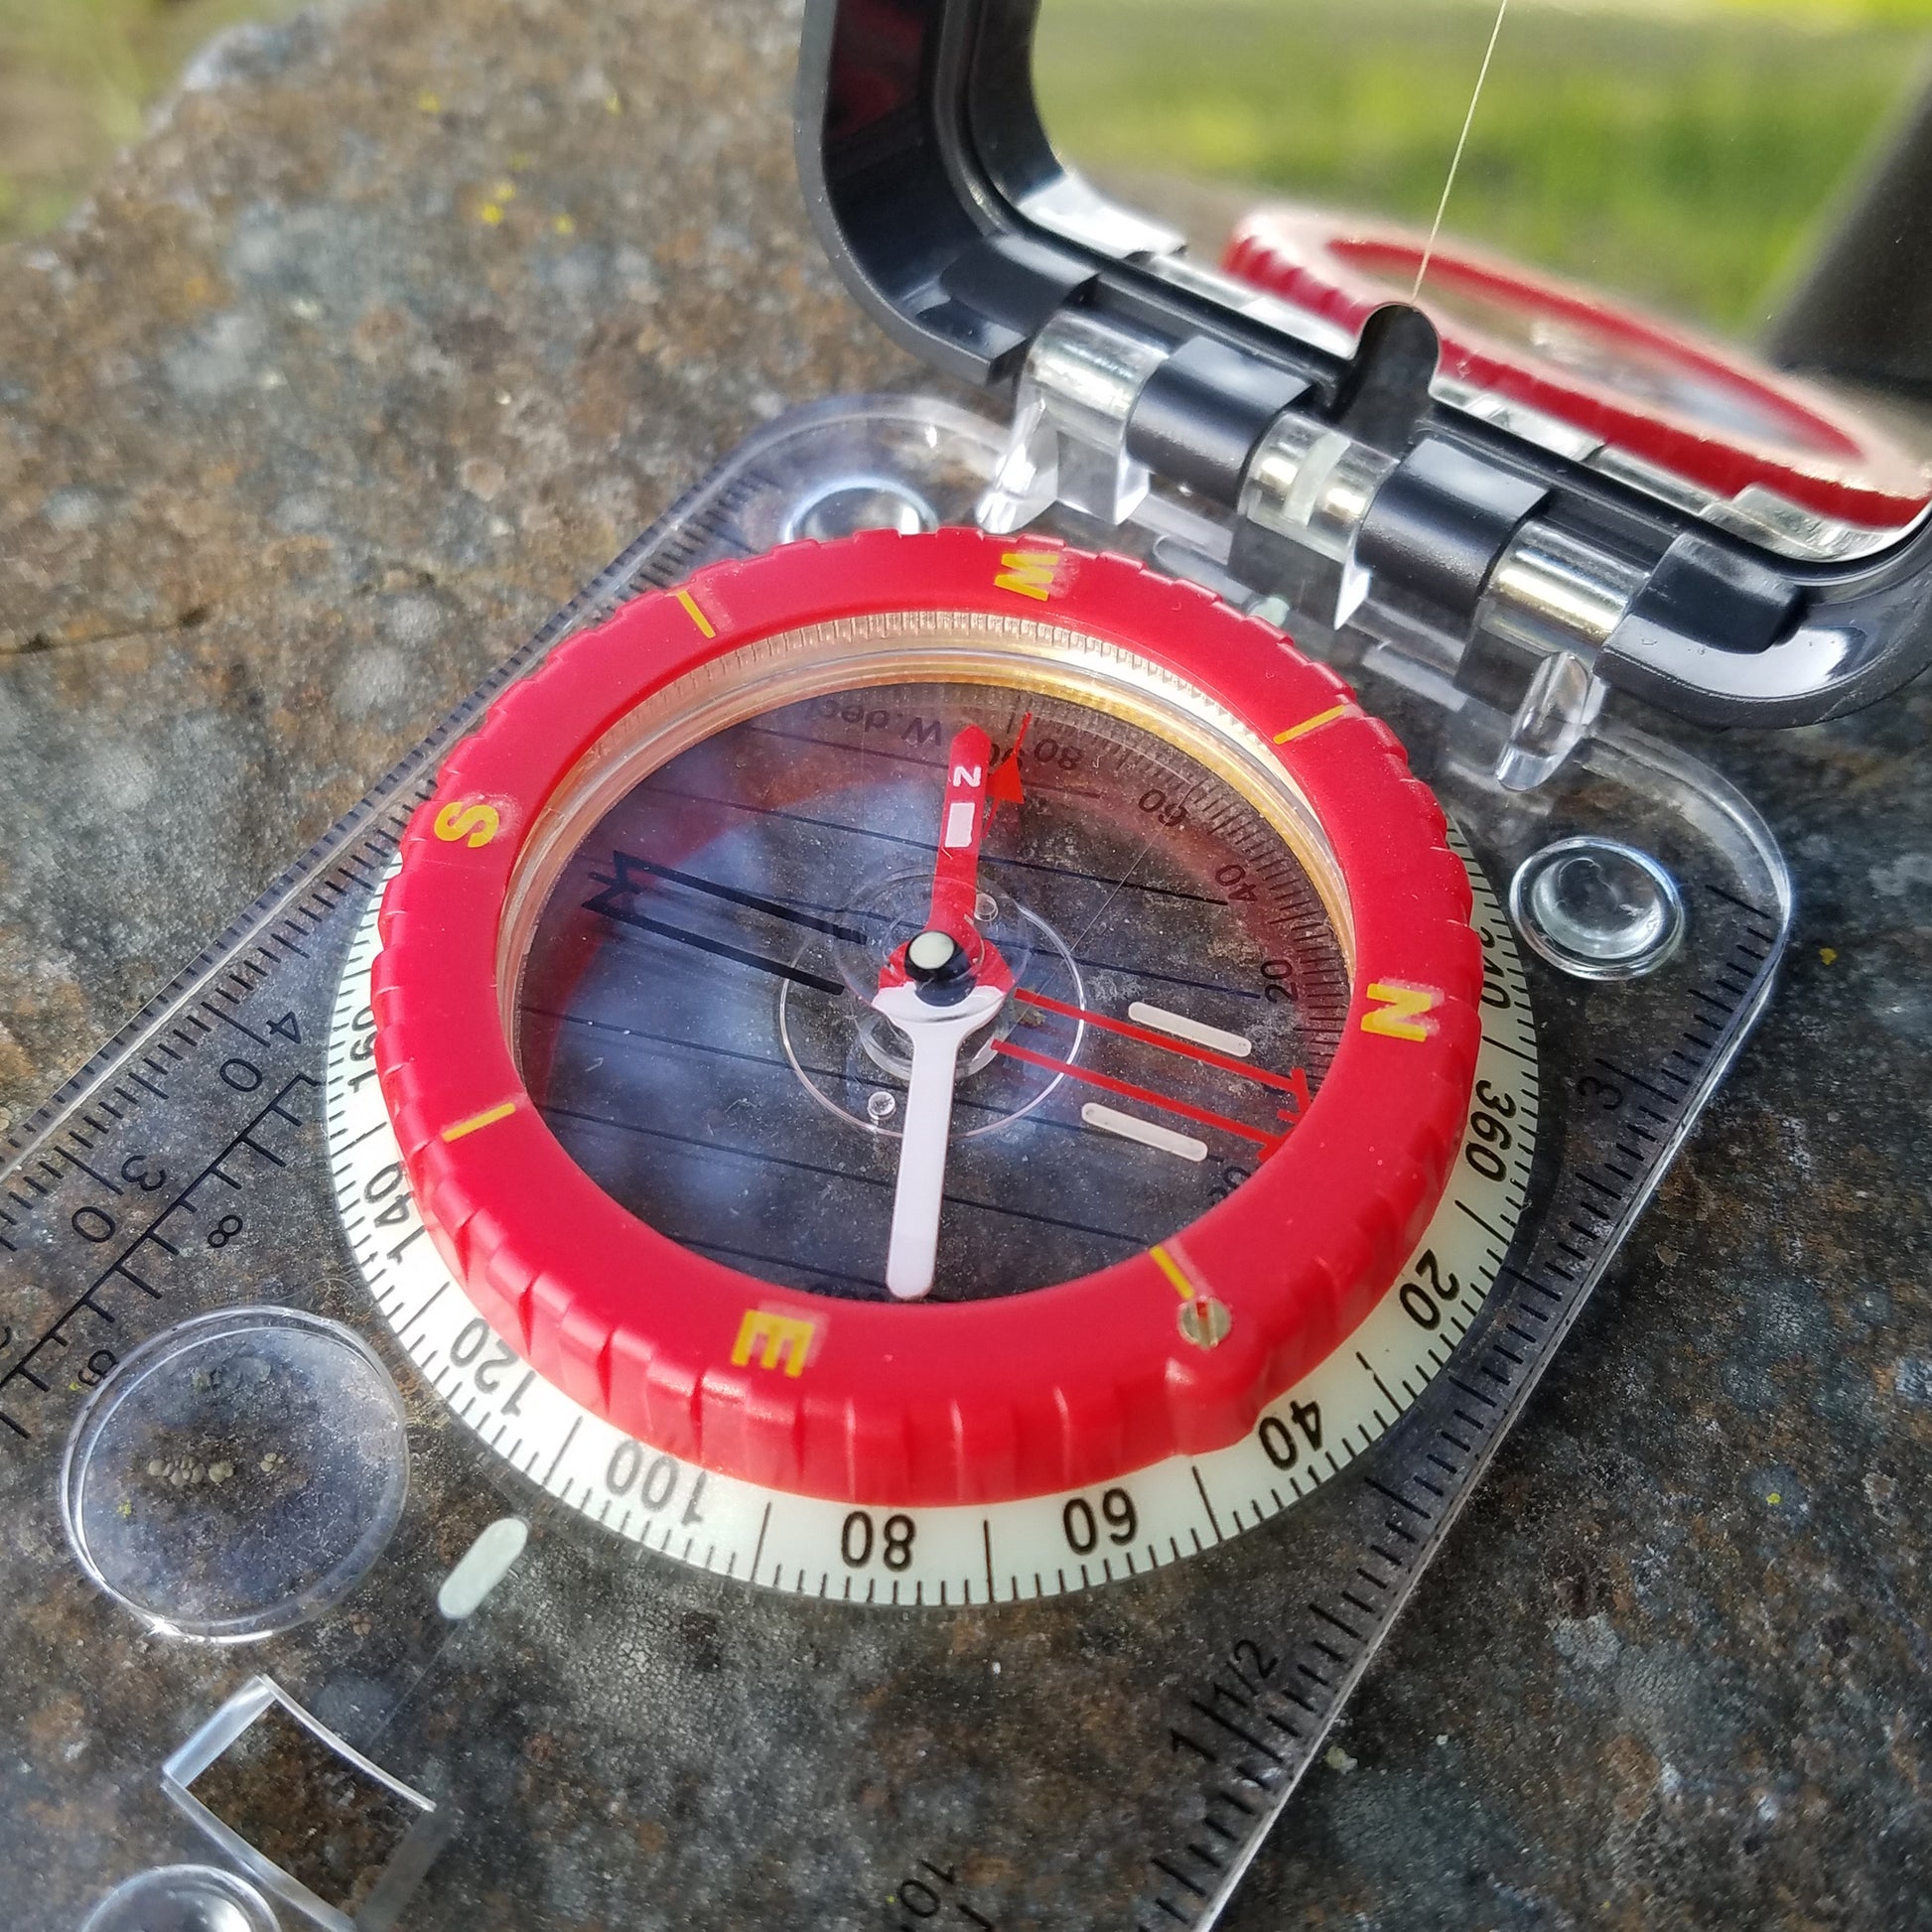 RS46 Folding Compass with adjustable declination, map scale and magnifying lens